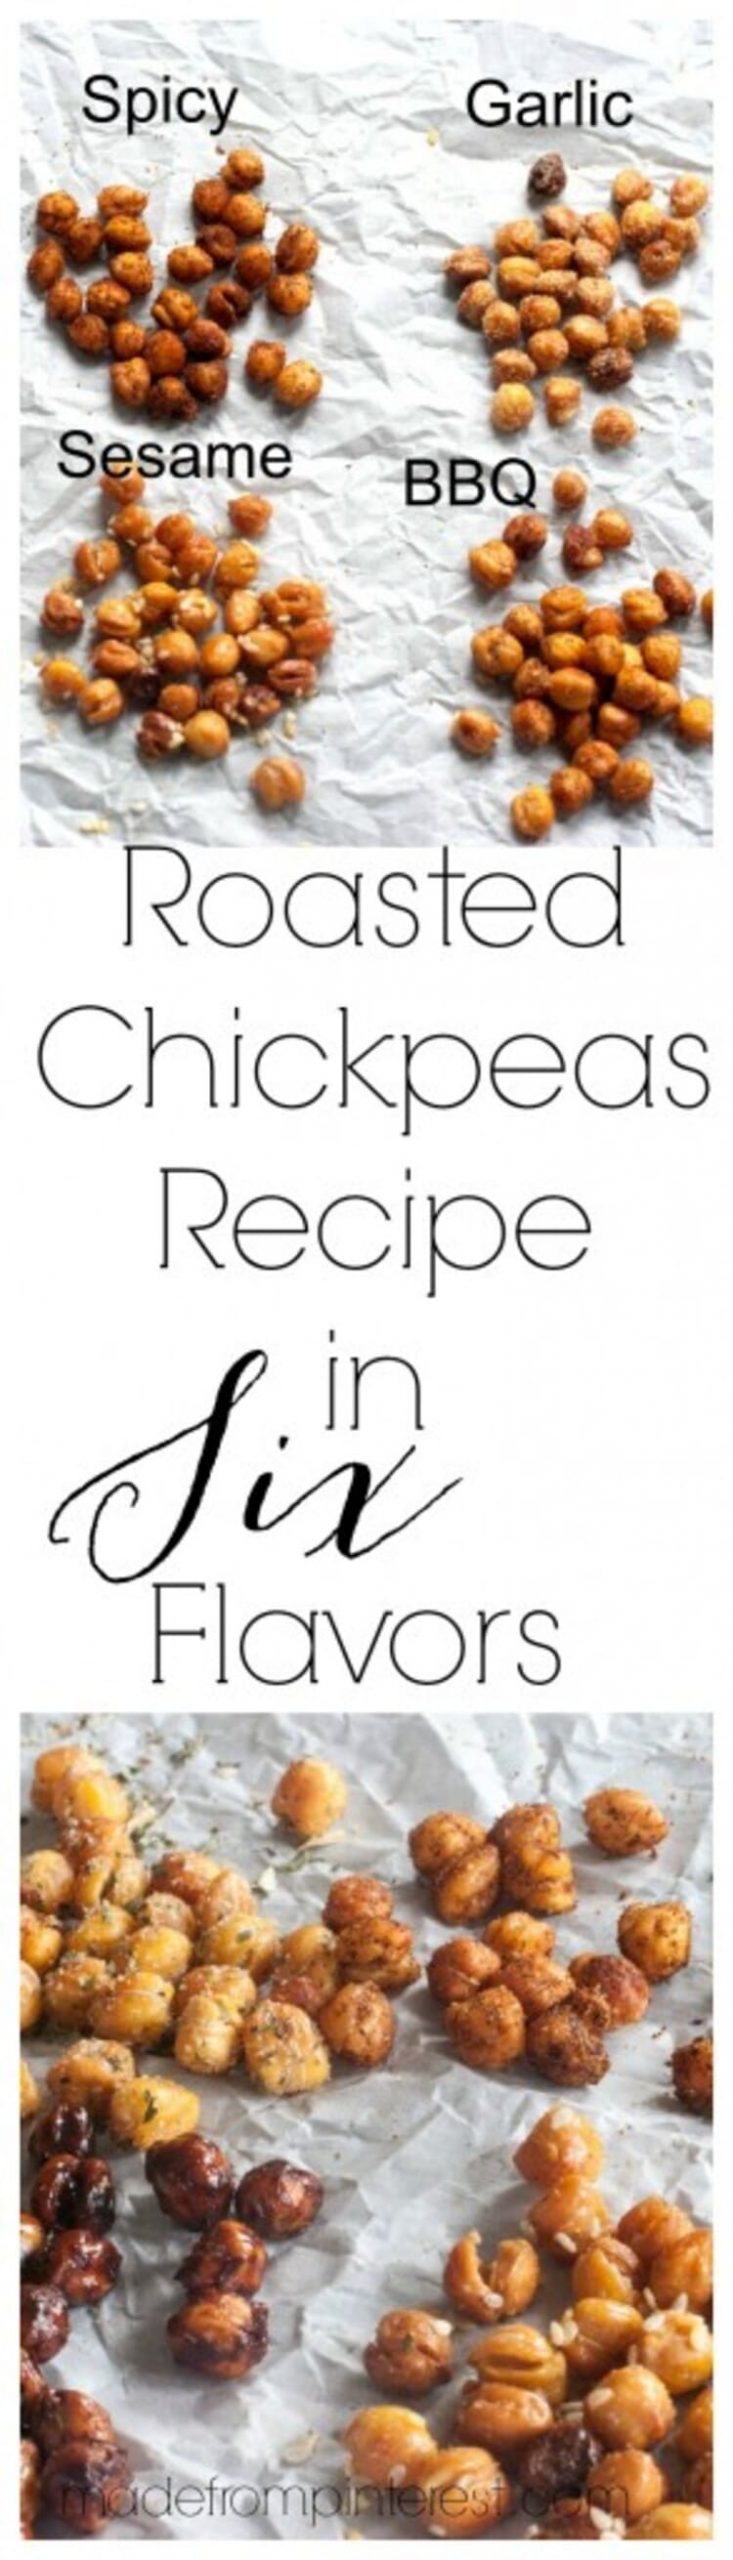 Roasted chickpeas recipes in six flavors on a white background